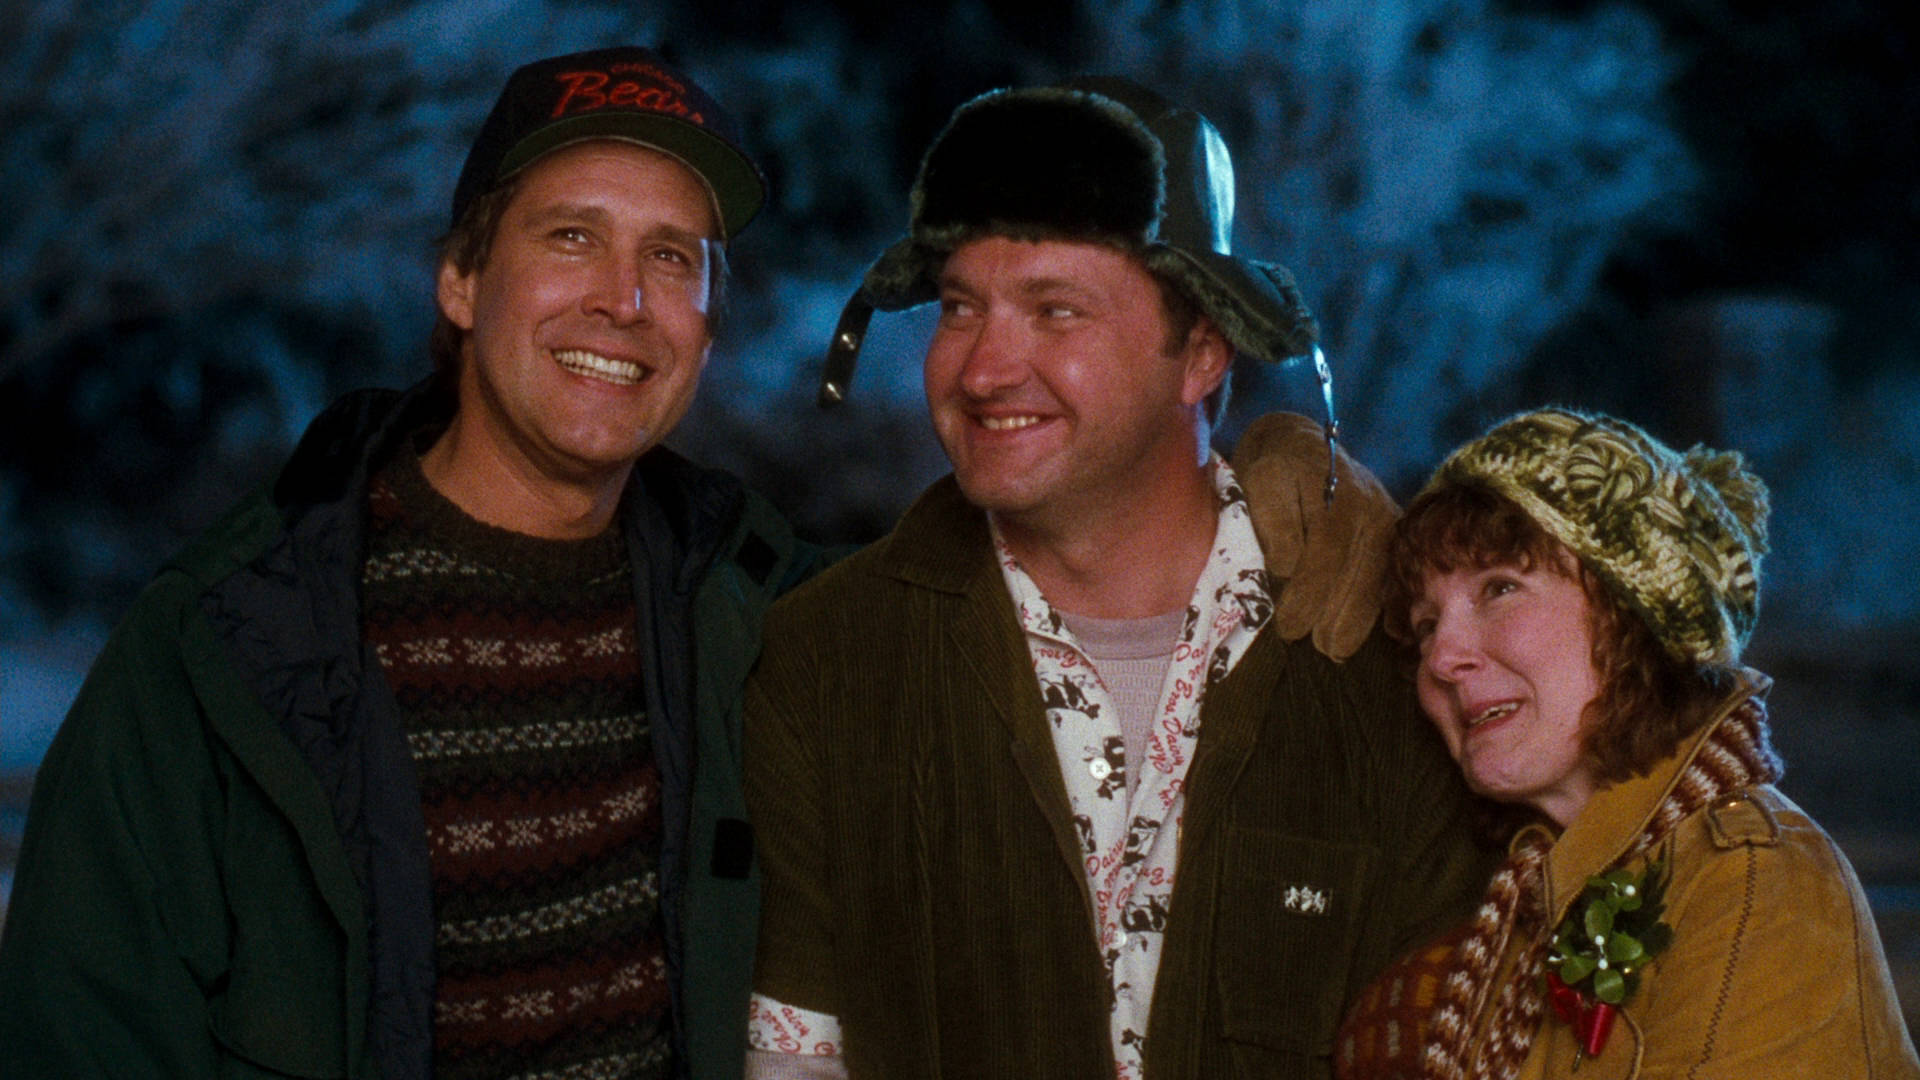 Celebrating The Holidays With Family In Christmas Vacation Background